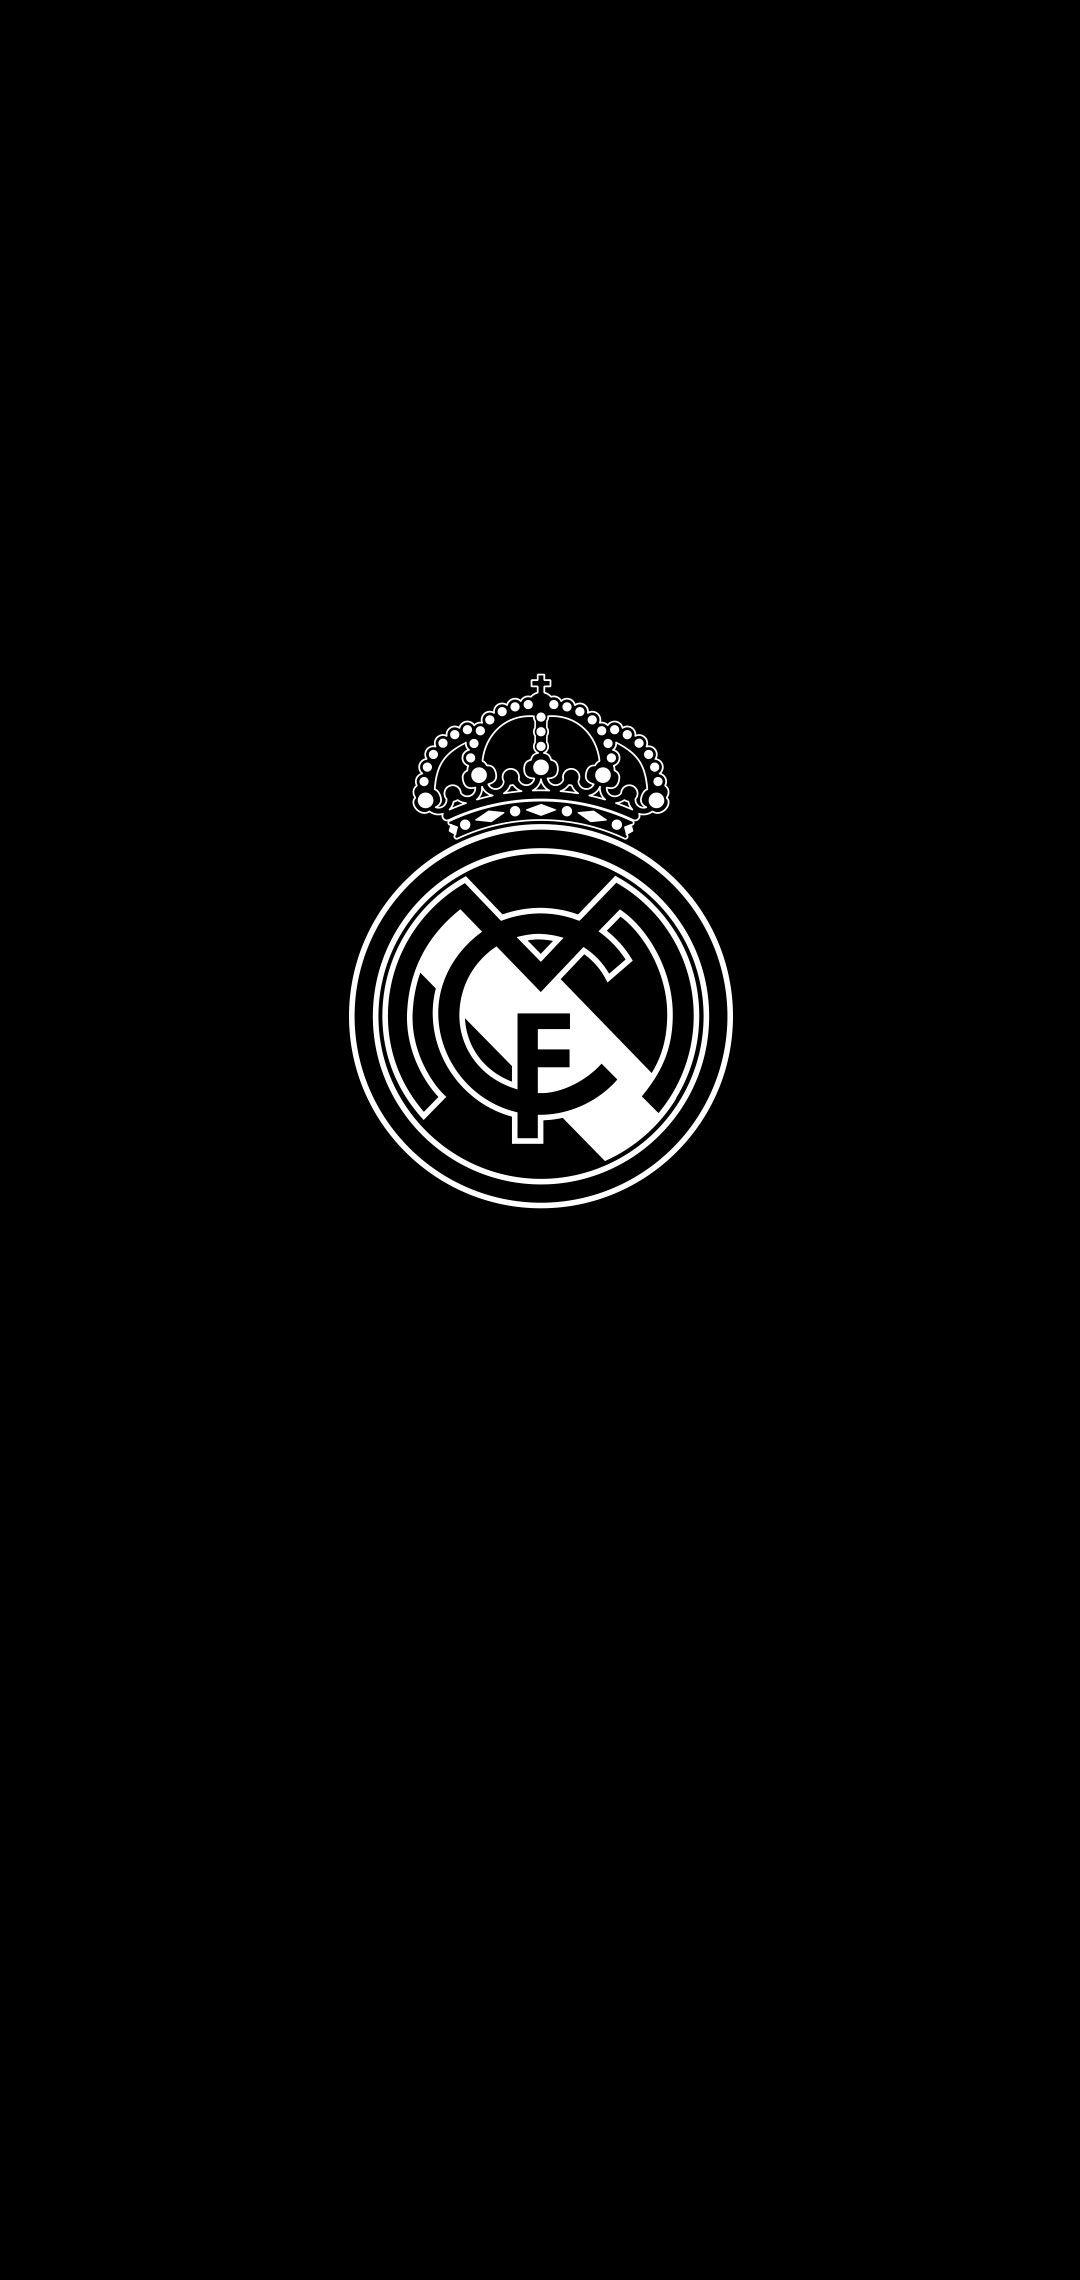 White logo in Black background for your amoled display. Real madrid wallpaper, Real madrid logo, Real madrid